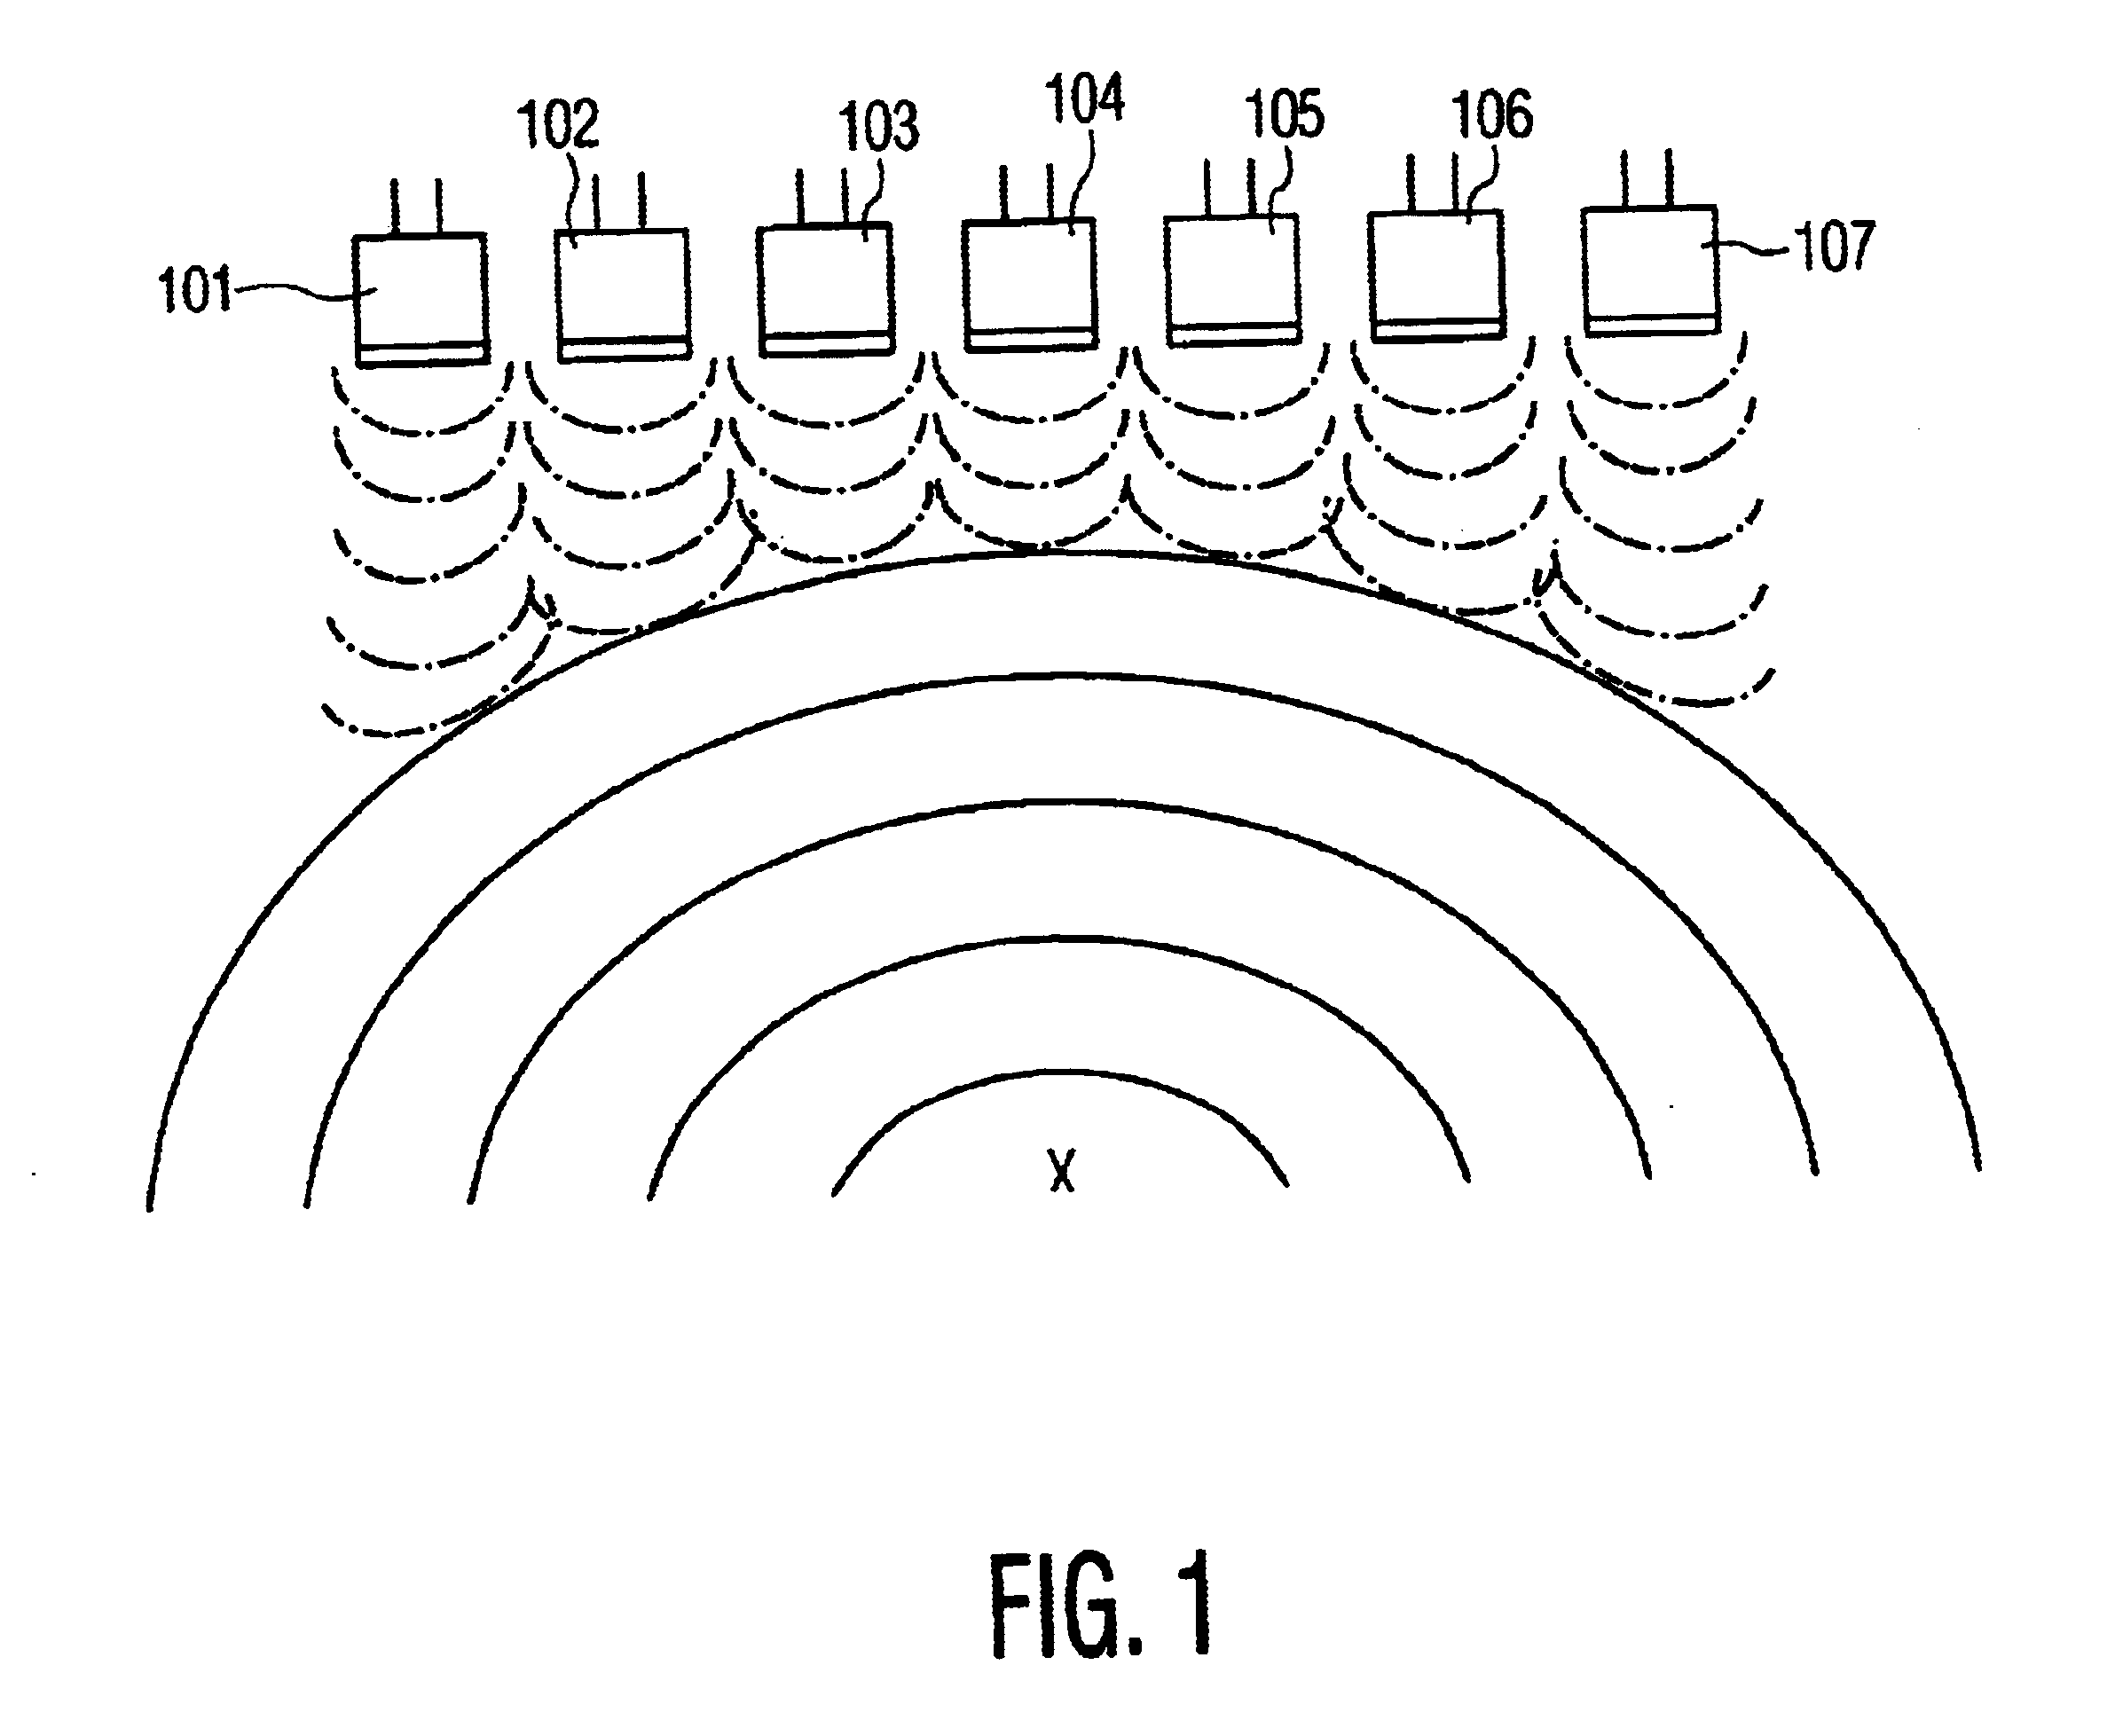 Operator supervised temperature control system and method for an ultrasound transducer